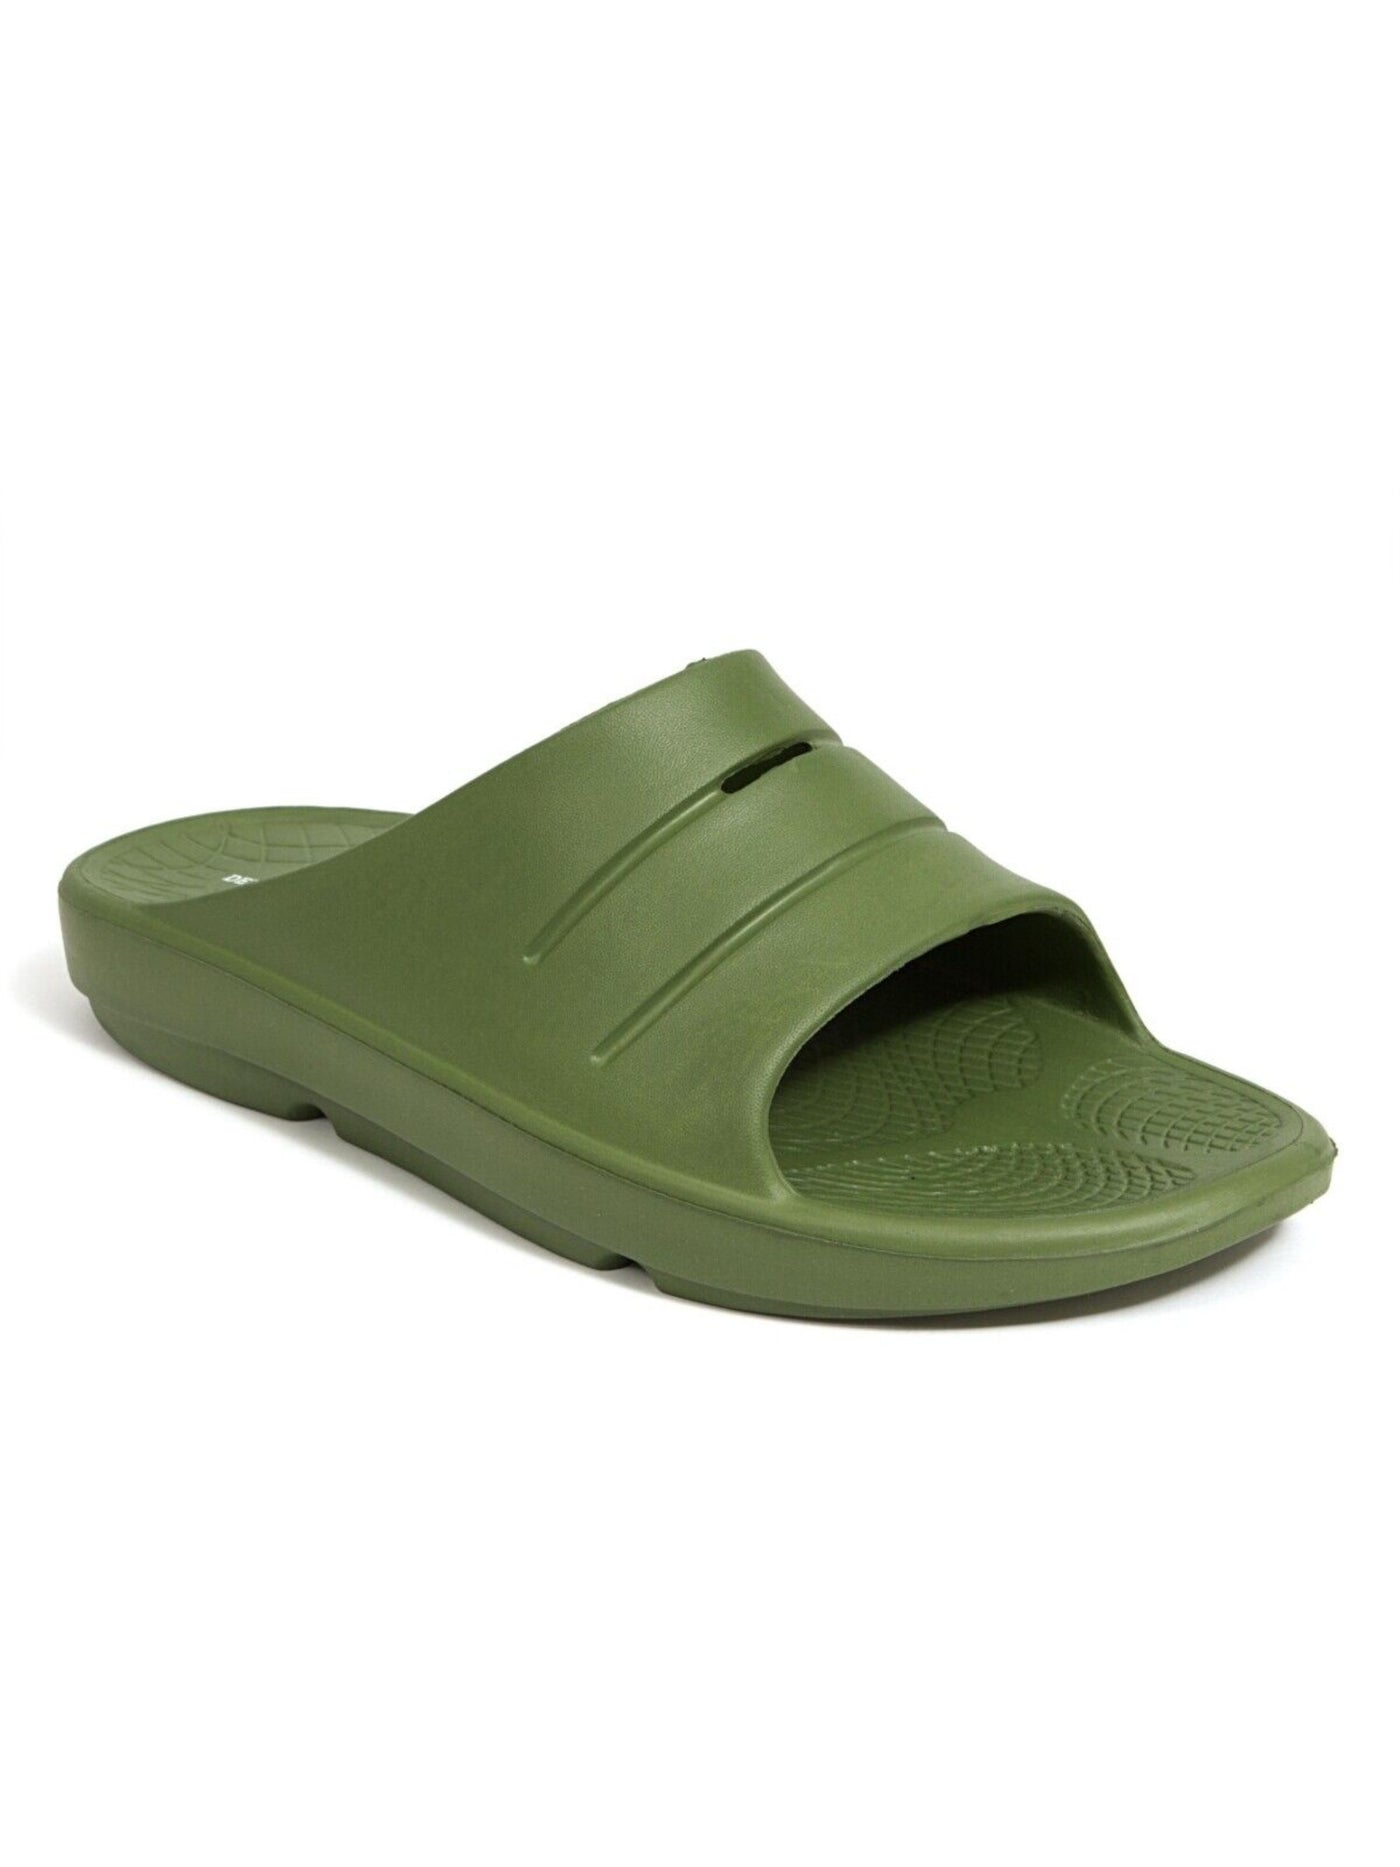 DEER STAGS Mens Green Molded Footbed Cushioned Ward Round Toe Slip On Slide Sandals Shoes 13 M